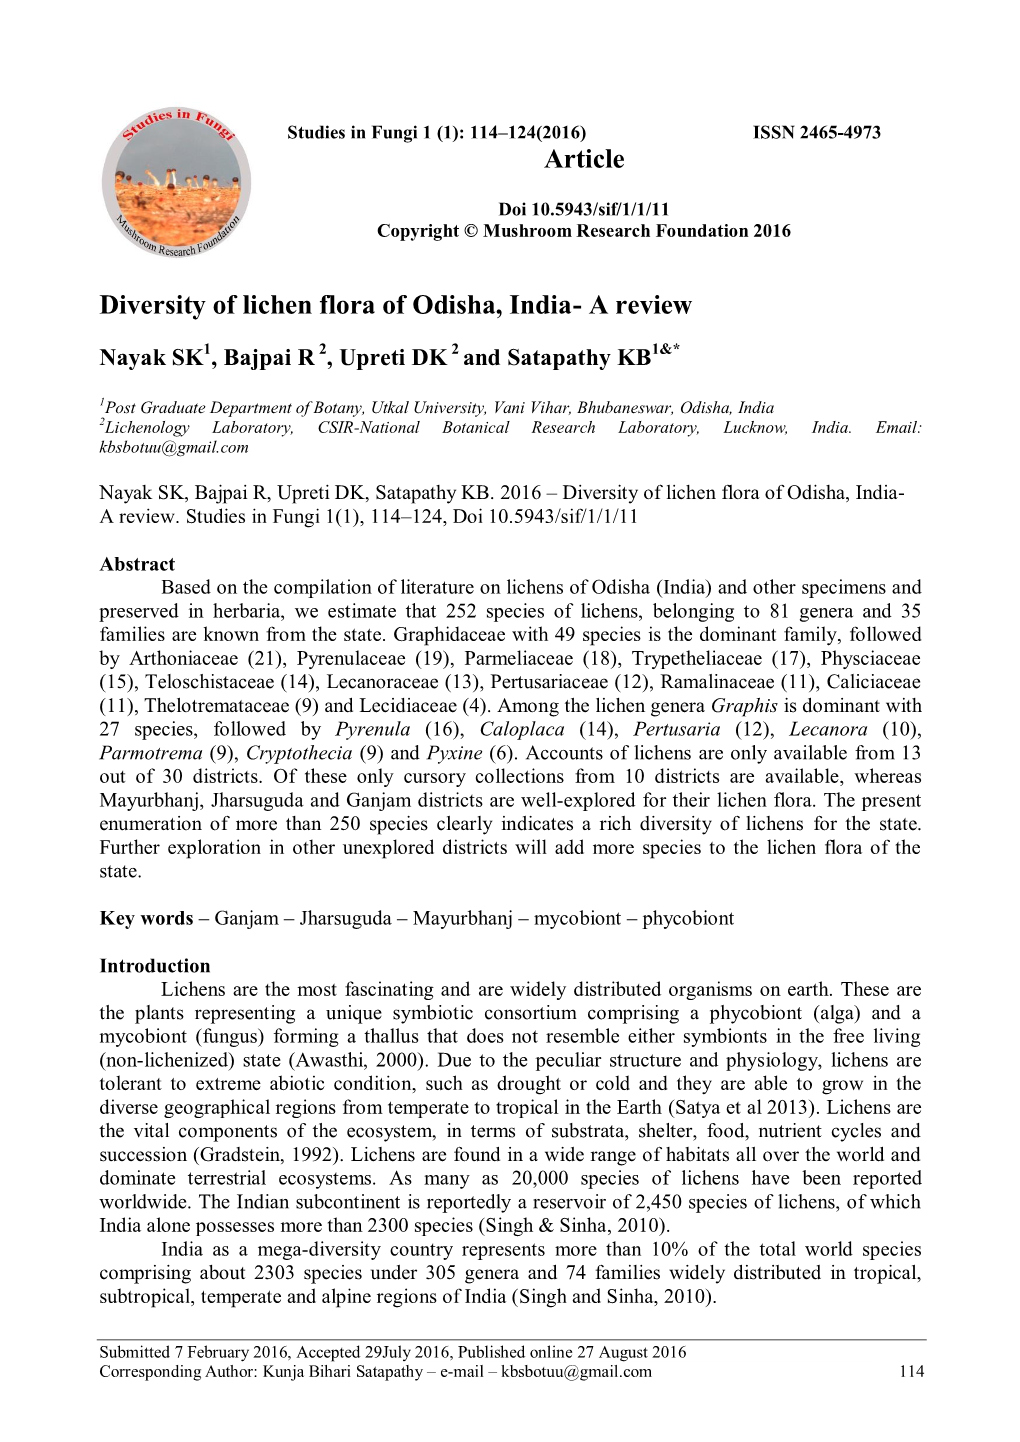 Diversity of Lichen Flora of Odisha, India- a Review